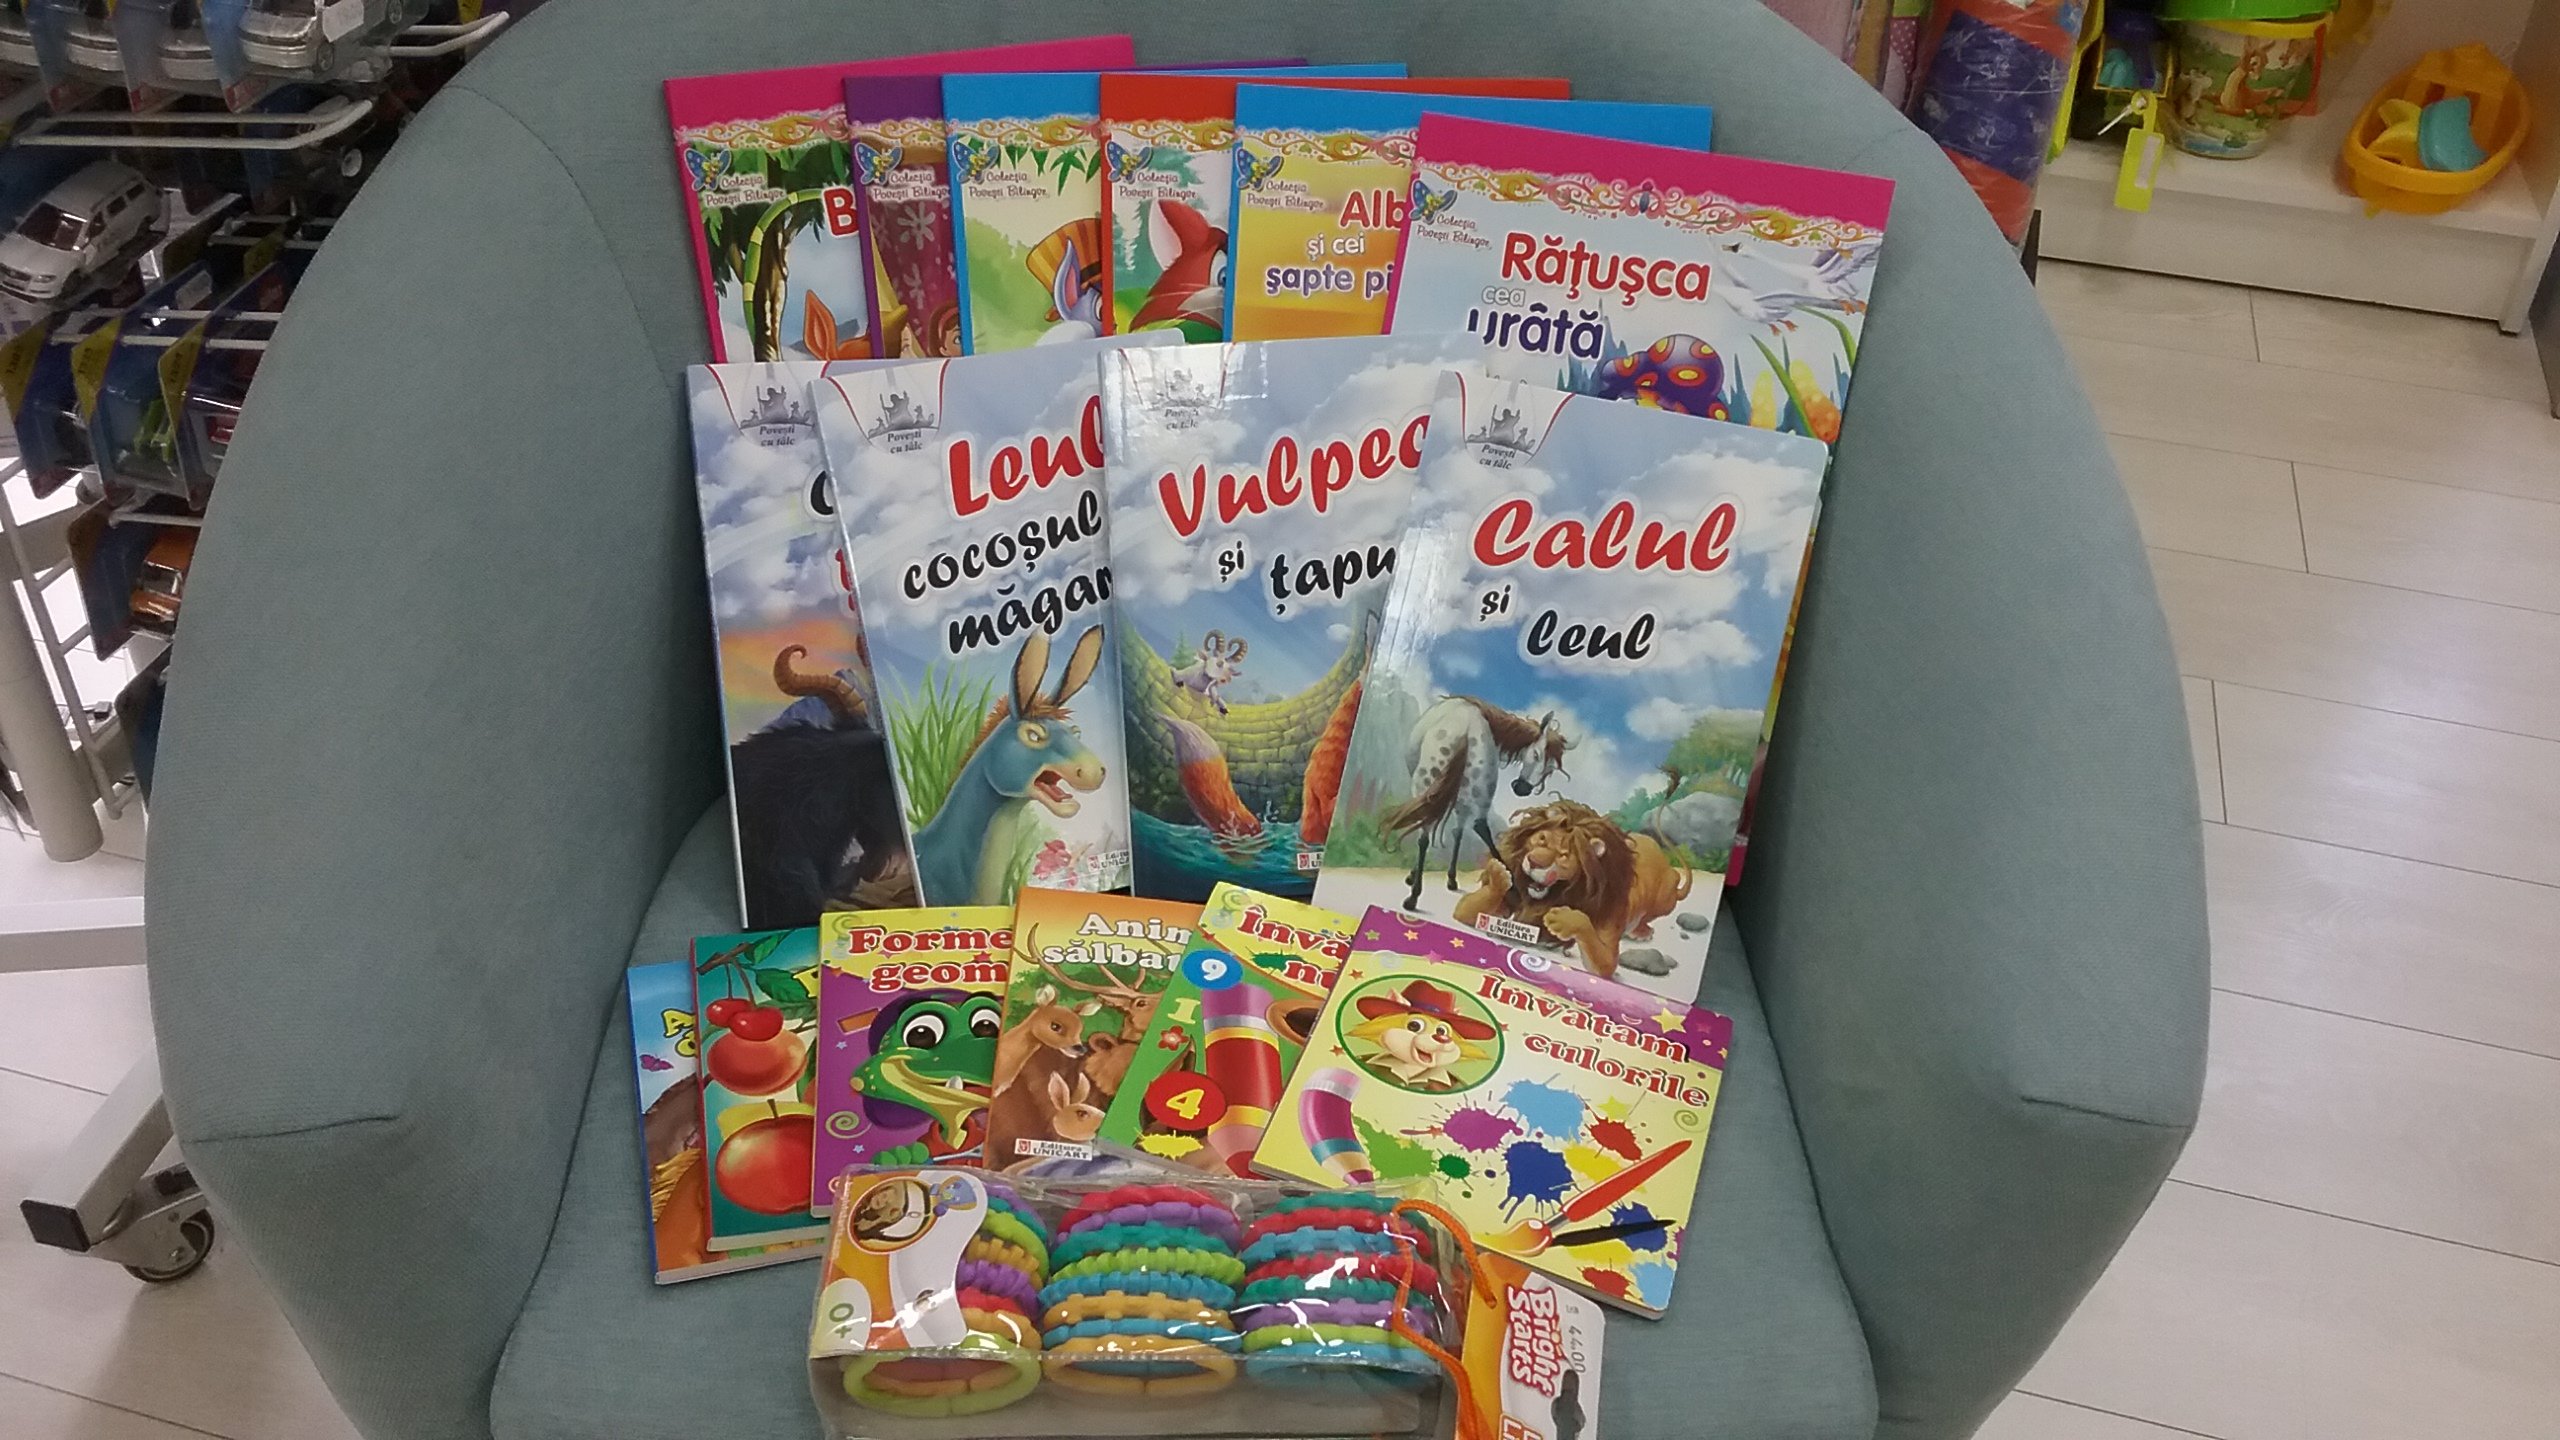 One of the things we do in Sibiu is purchase books so as the children leave the hospital each child can have a book of their own to keep.